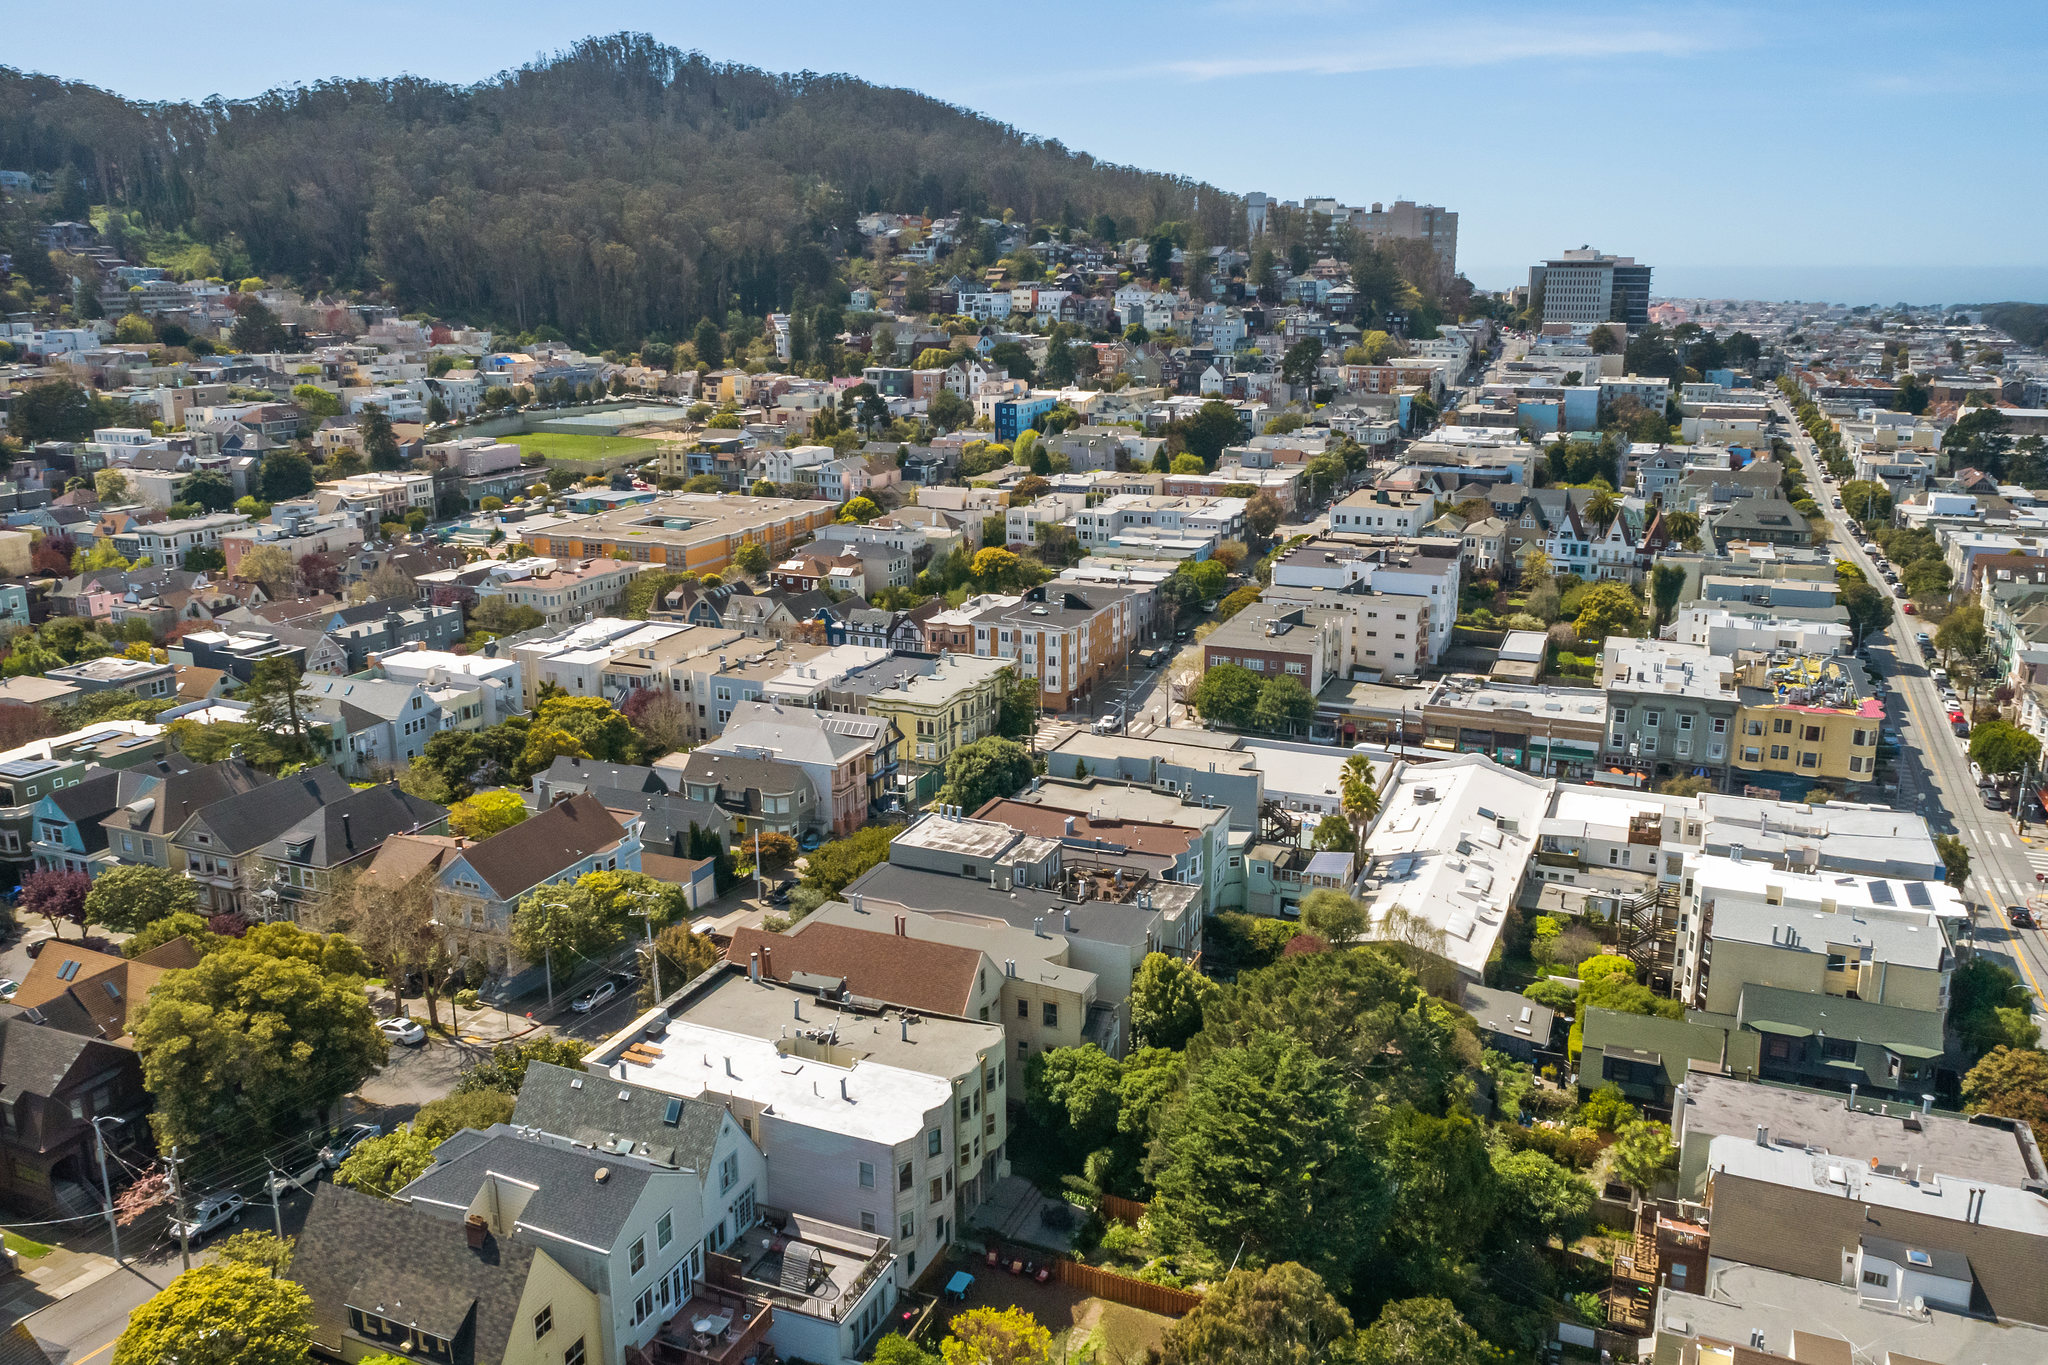 Property Photo: Aerial view of Cole Valley from 38 Parnassus Avenue, featuring Sutro Forrest